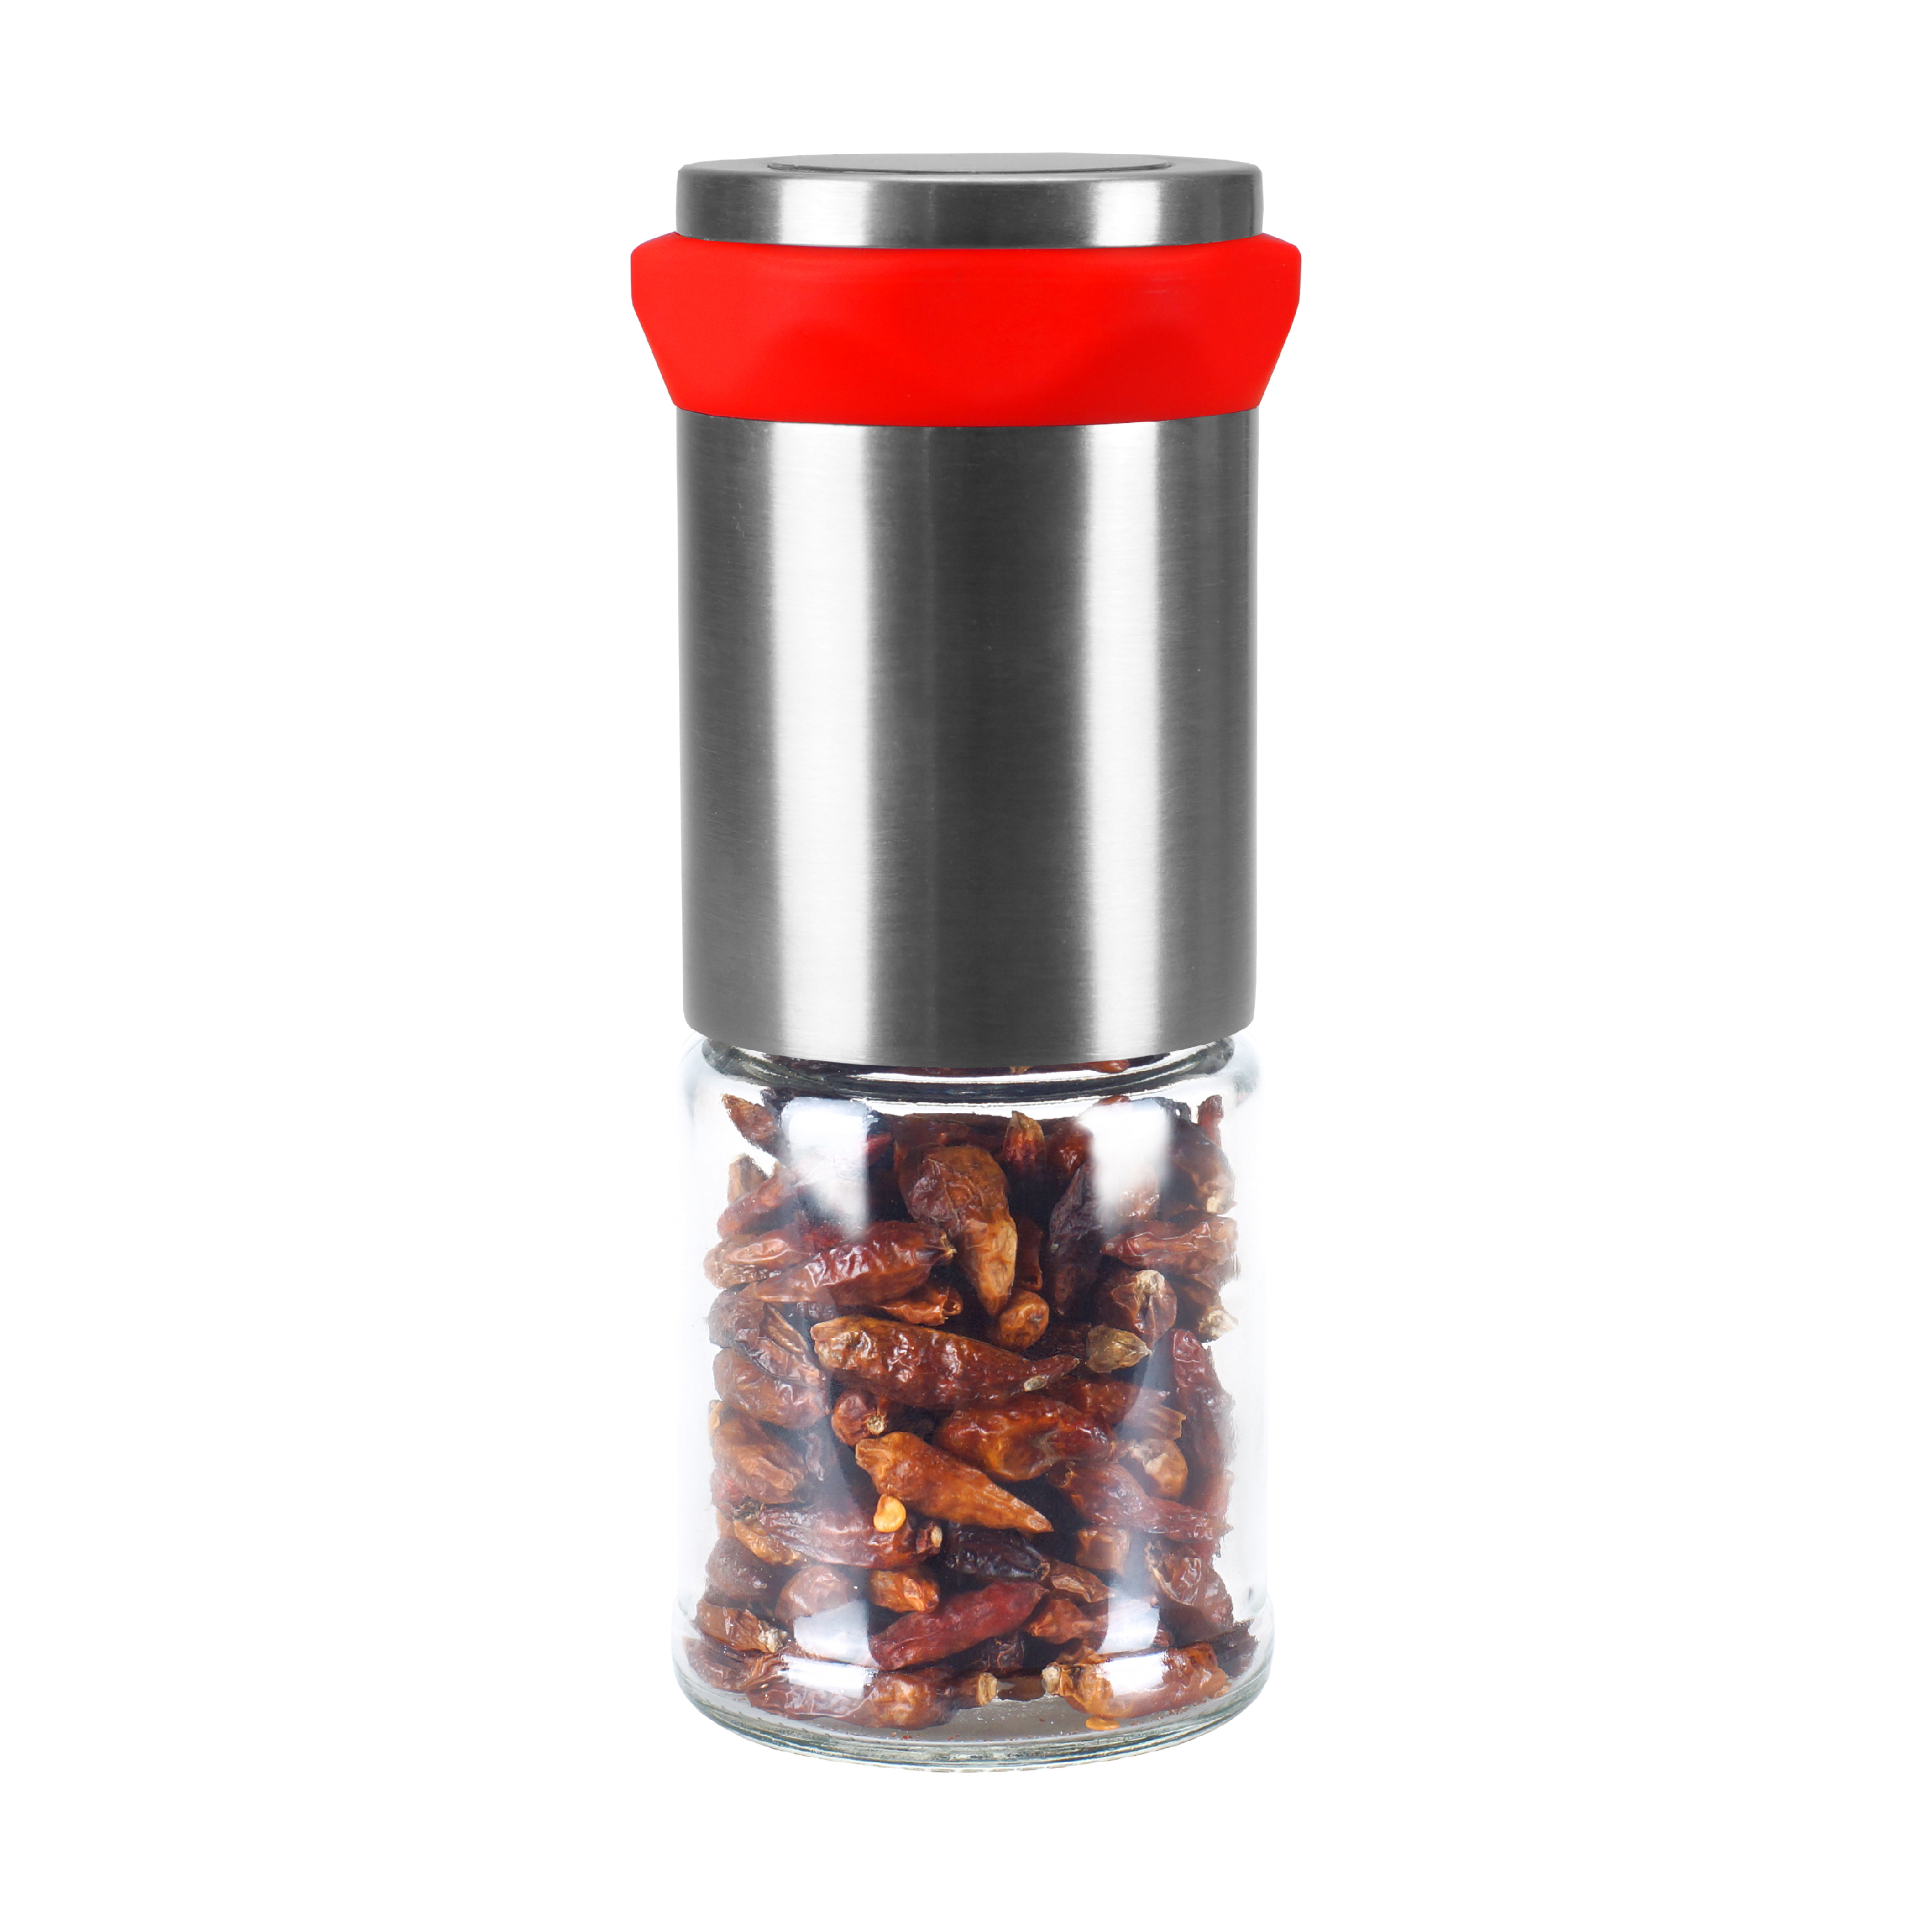 Stainless Steel Manual Dry Chili Grinder With Glass Jar